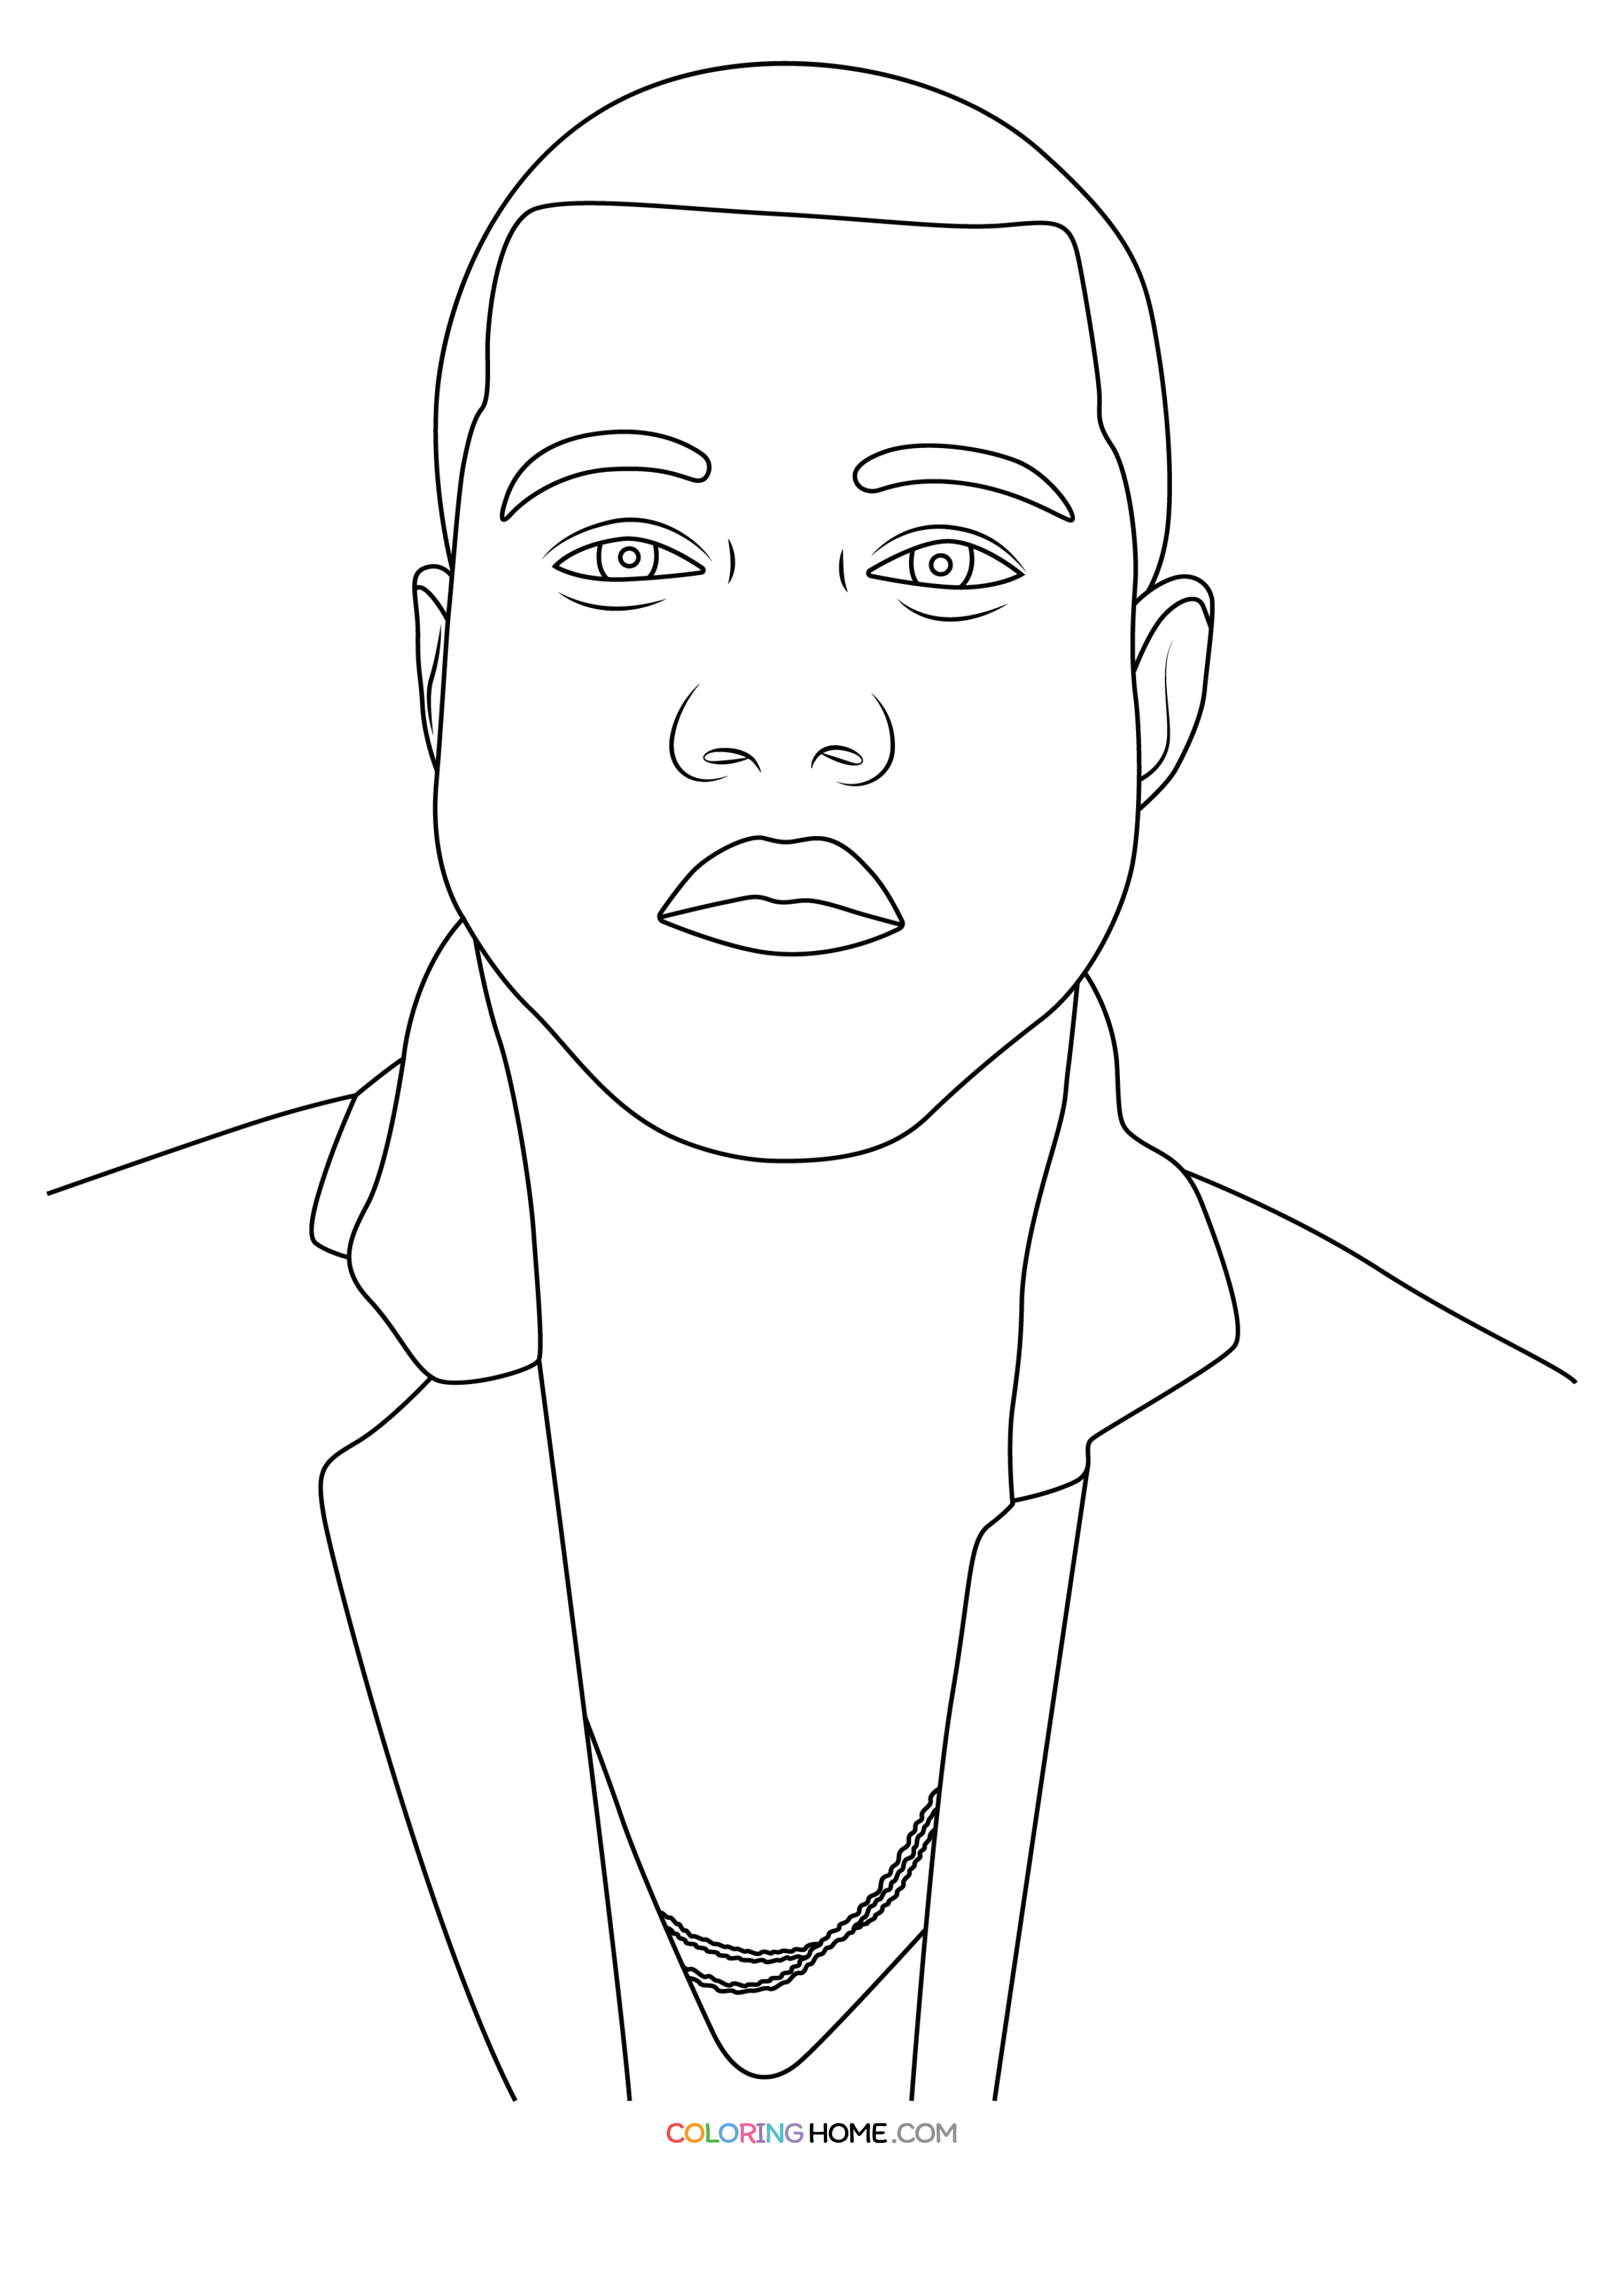 Kanye West coloring page